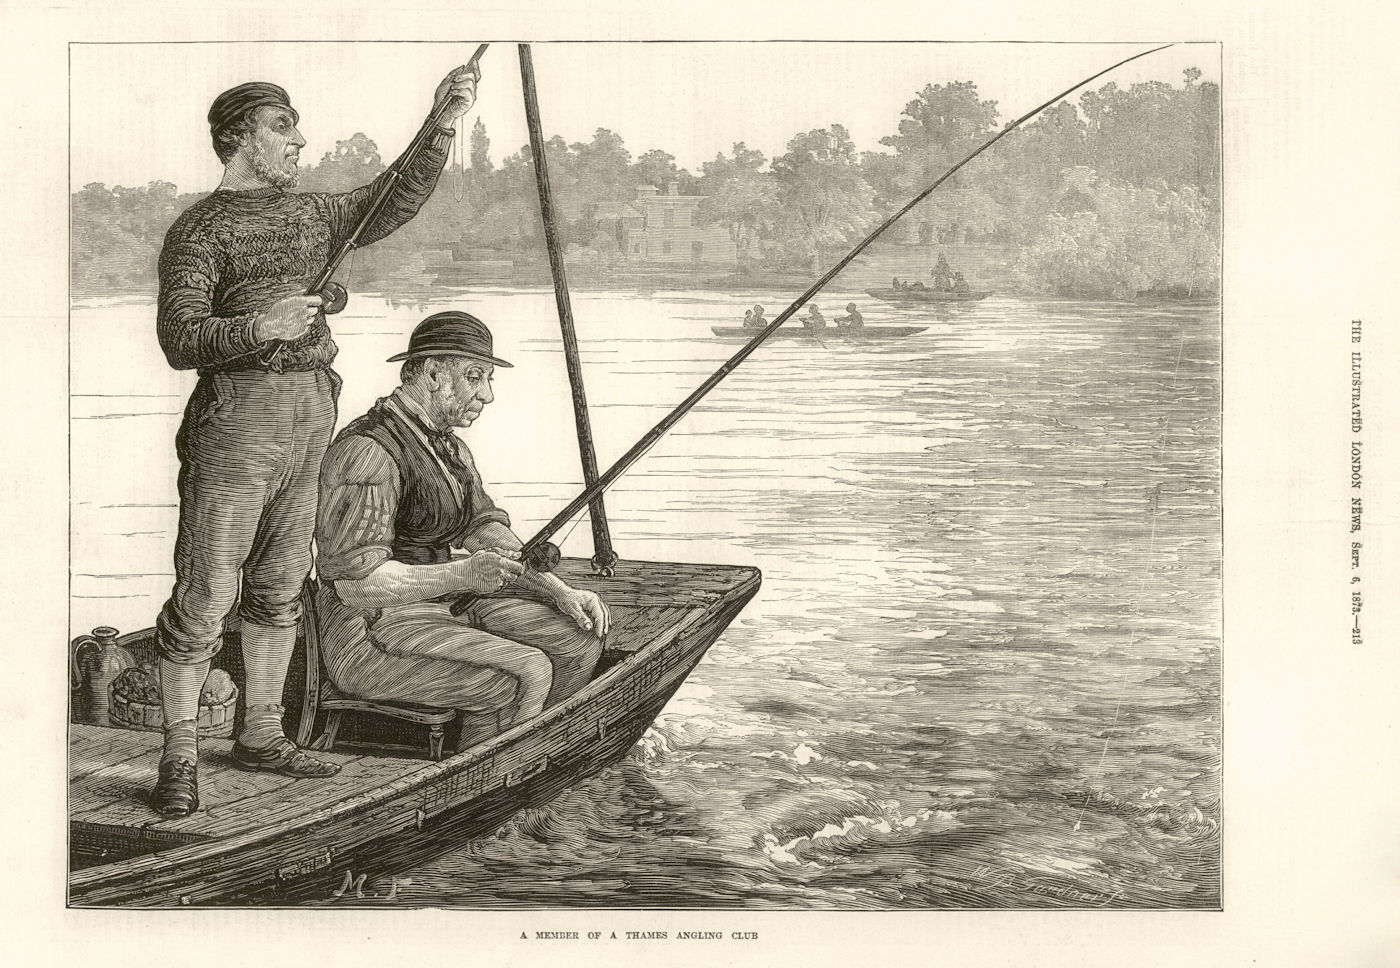 Associate Product A member of a Thames angling club. Fishing 1873 old antique print picture